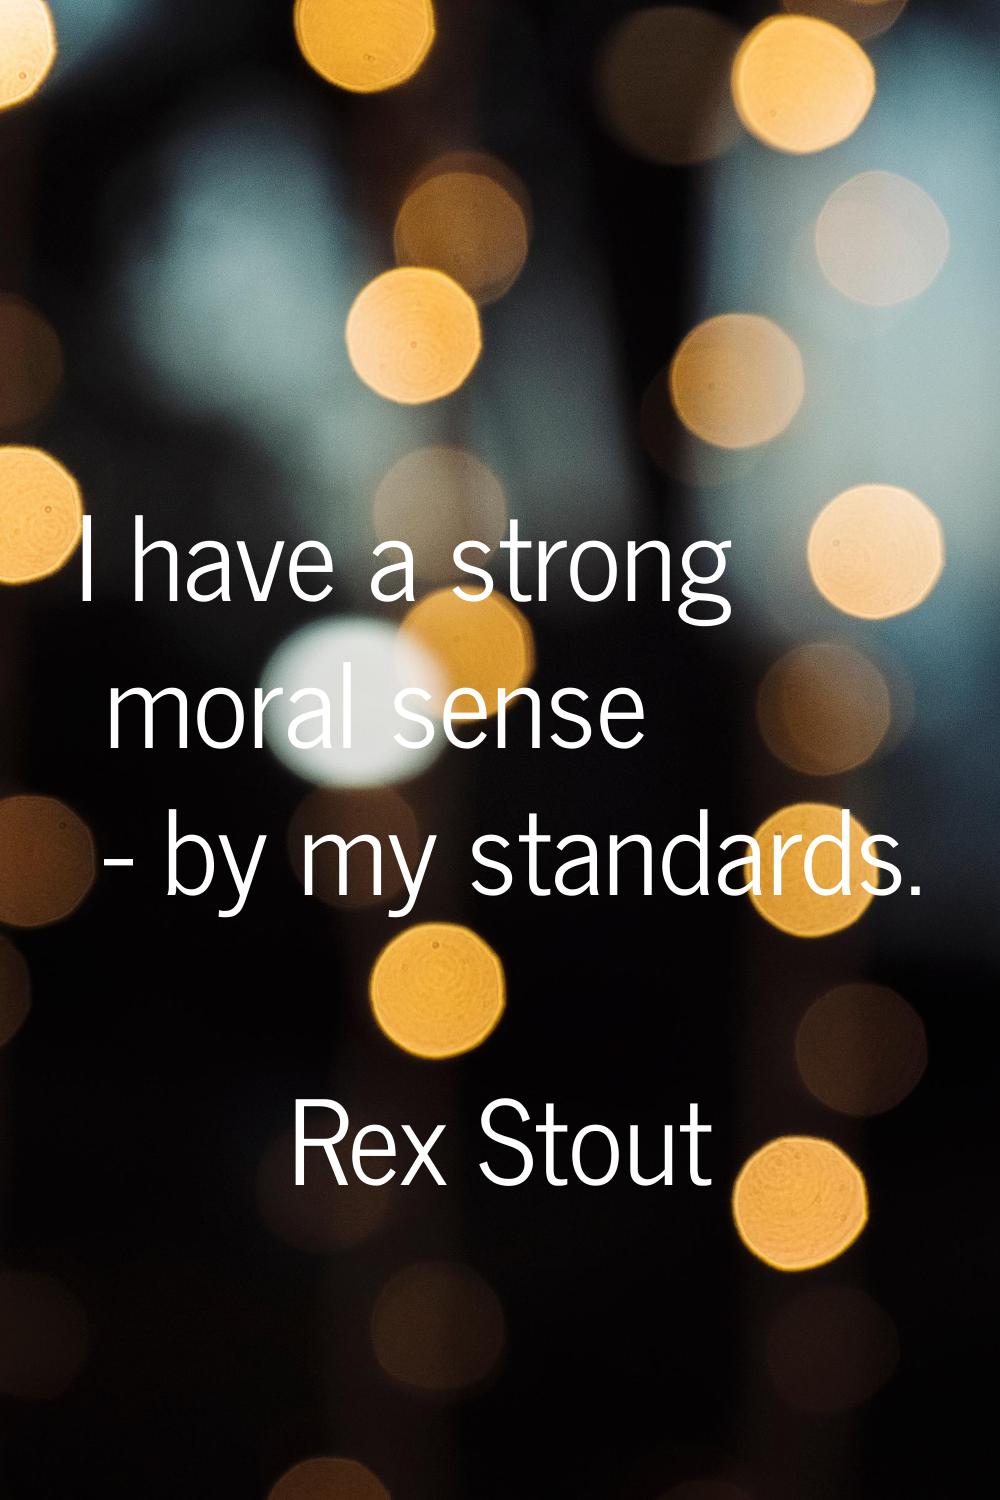 I have a strong moral sense - by my standards.